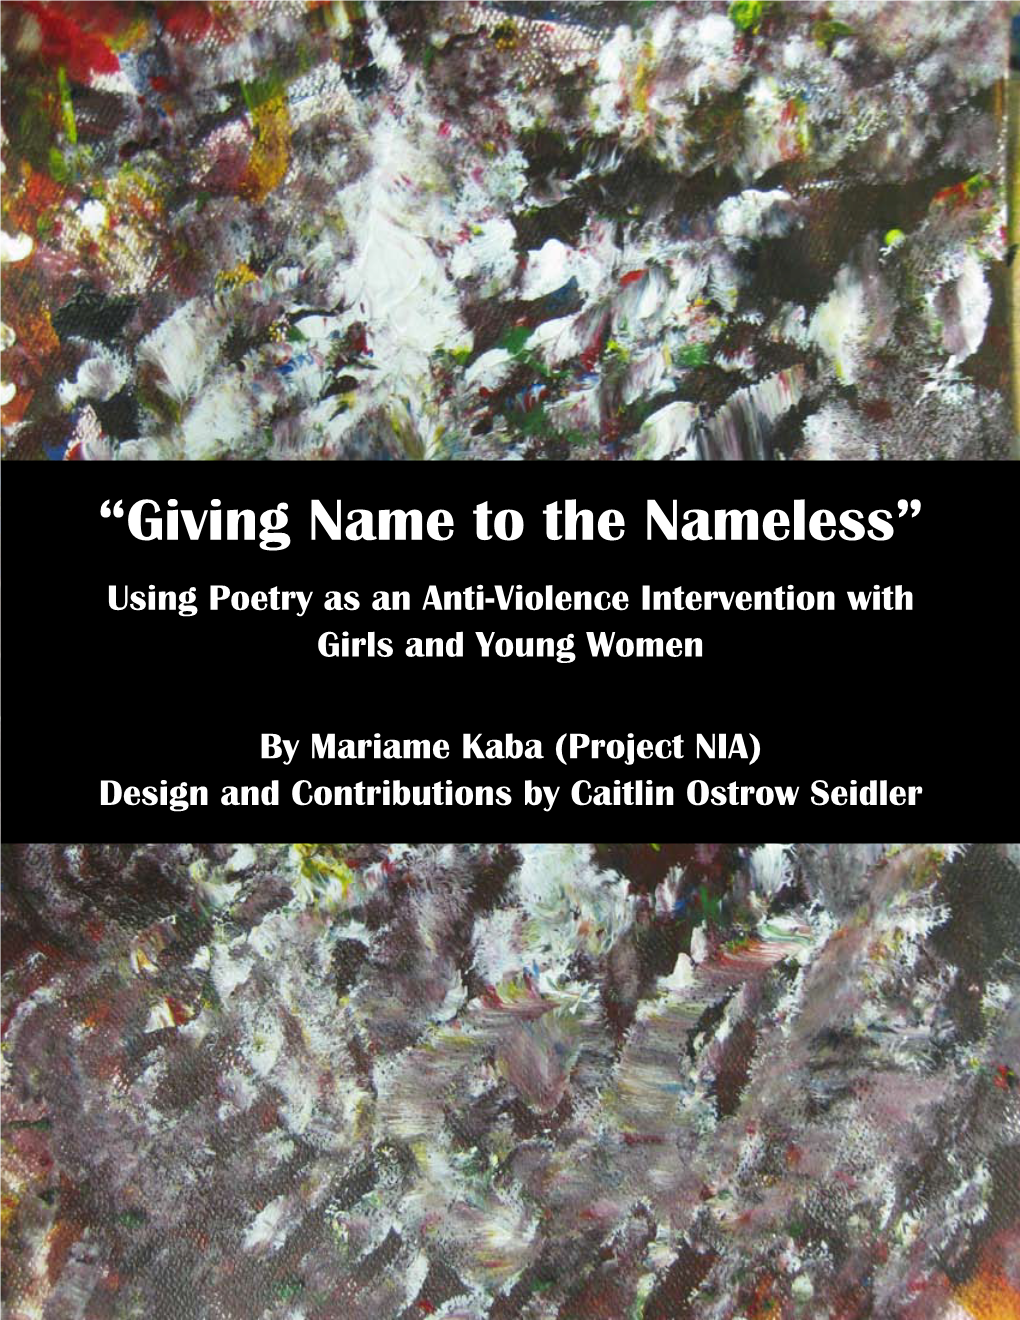 “Giving Name to the Nameless” Using Poetry As an Anti-Violence Intervention with Girls and Young Women